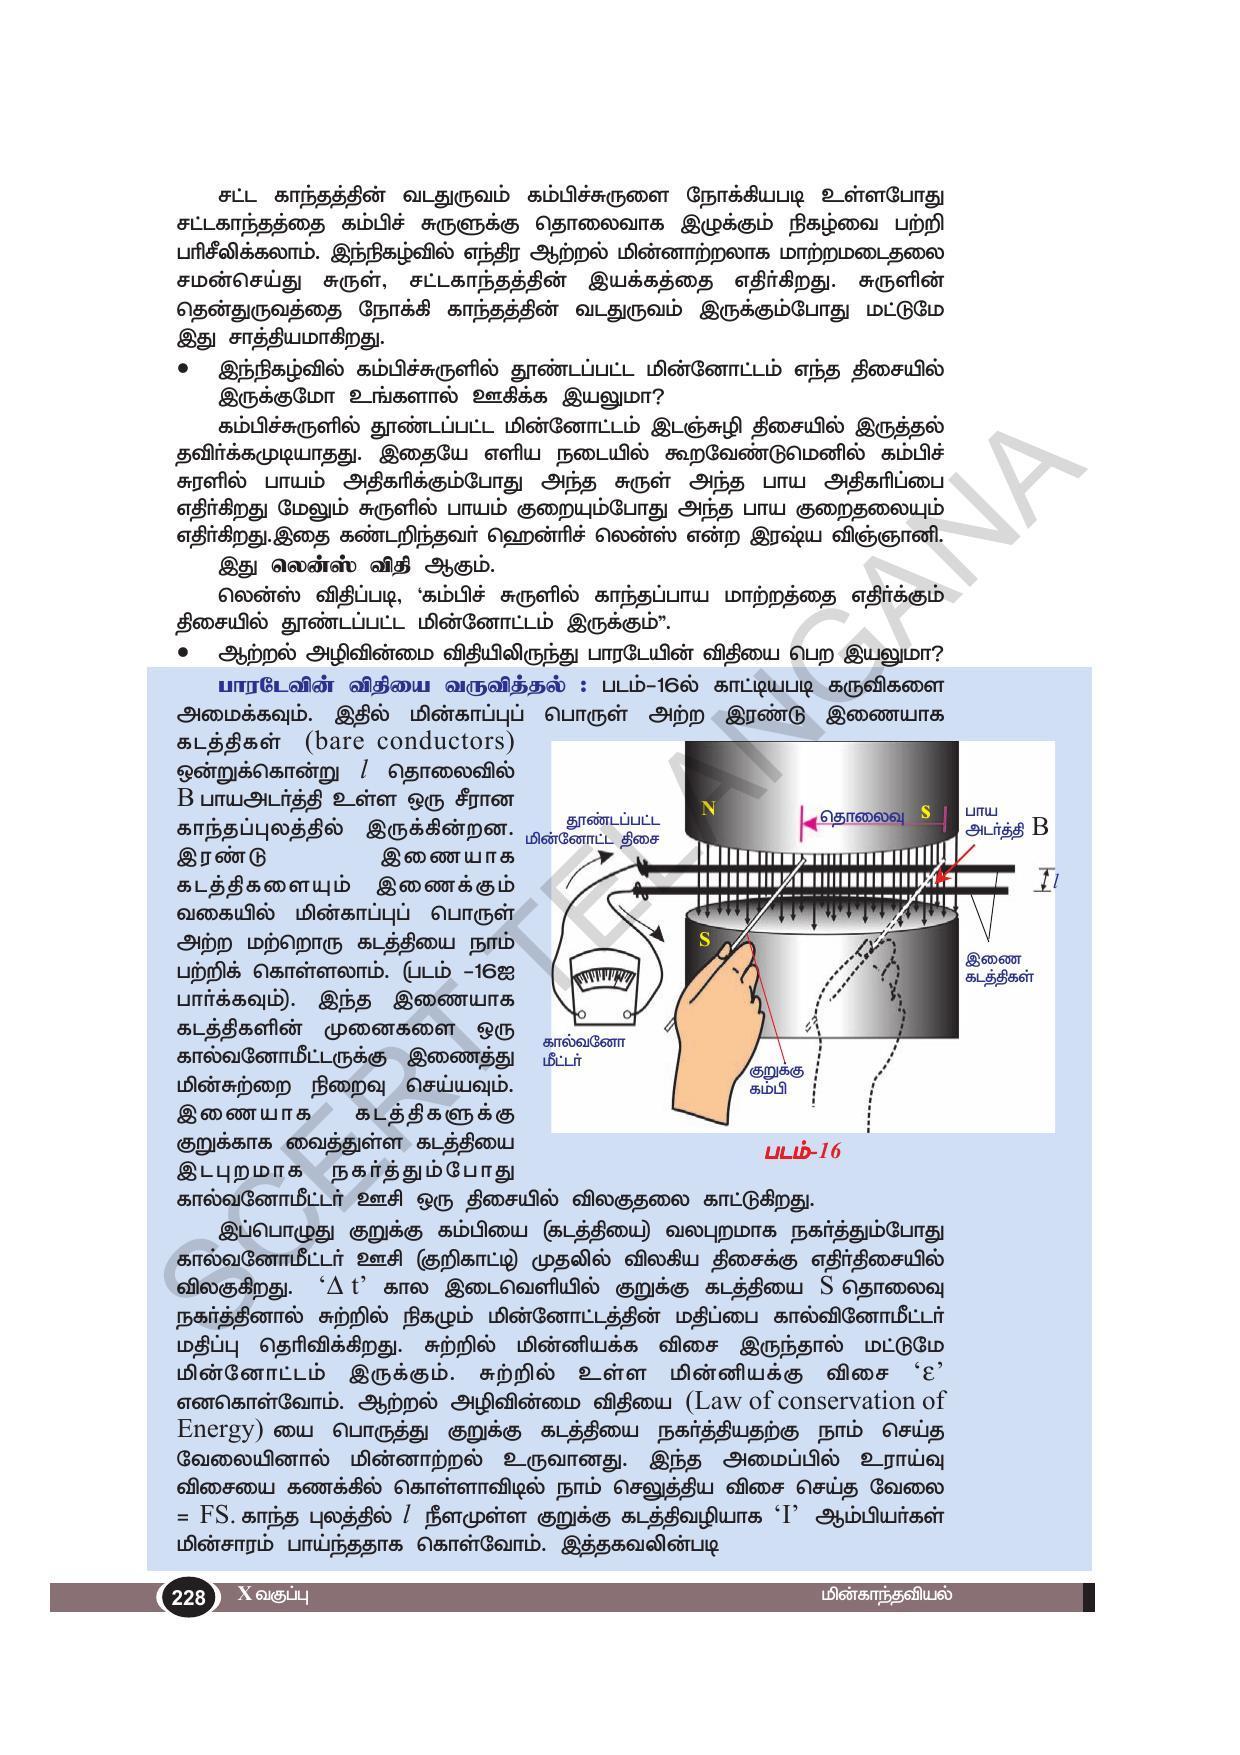 TS SCERT Class 10 Physical Science(Tamil Medium) Text Book - Page 240